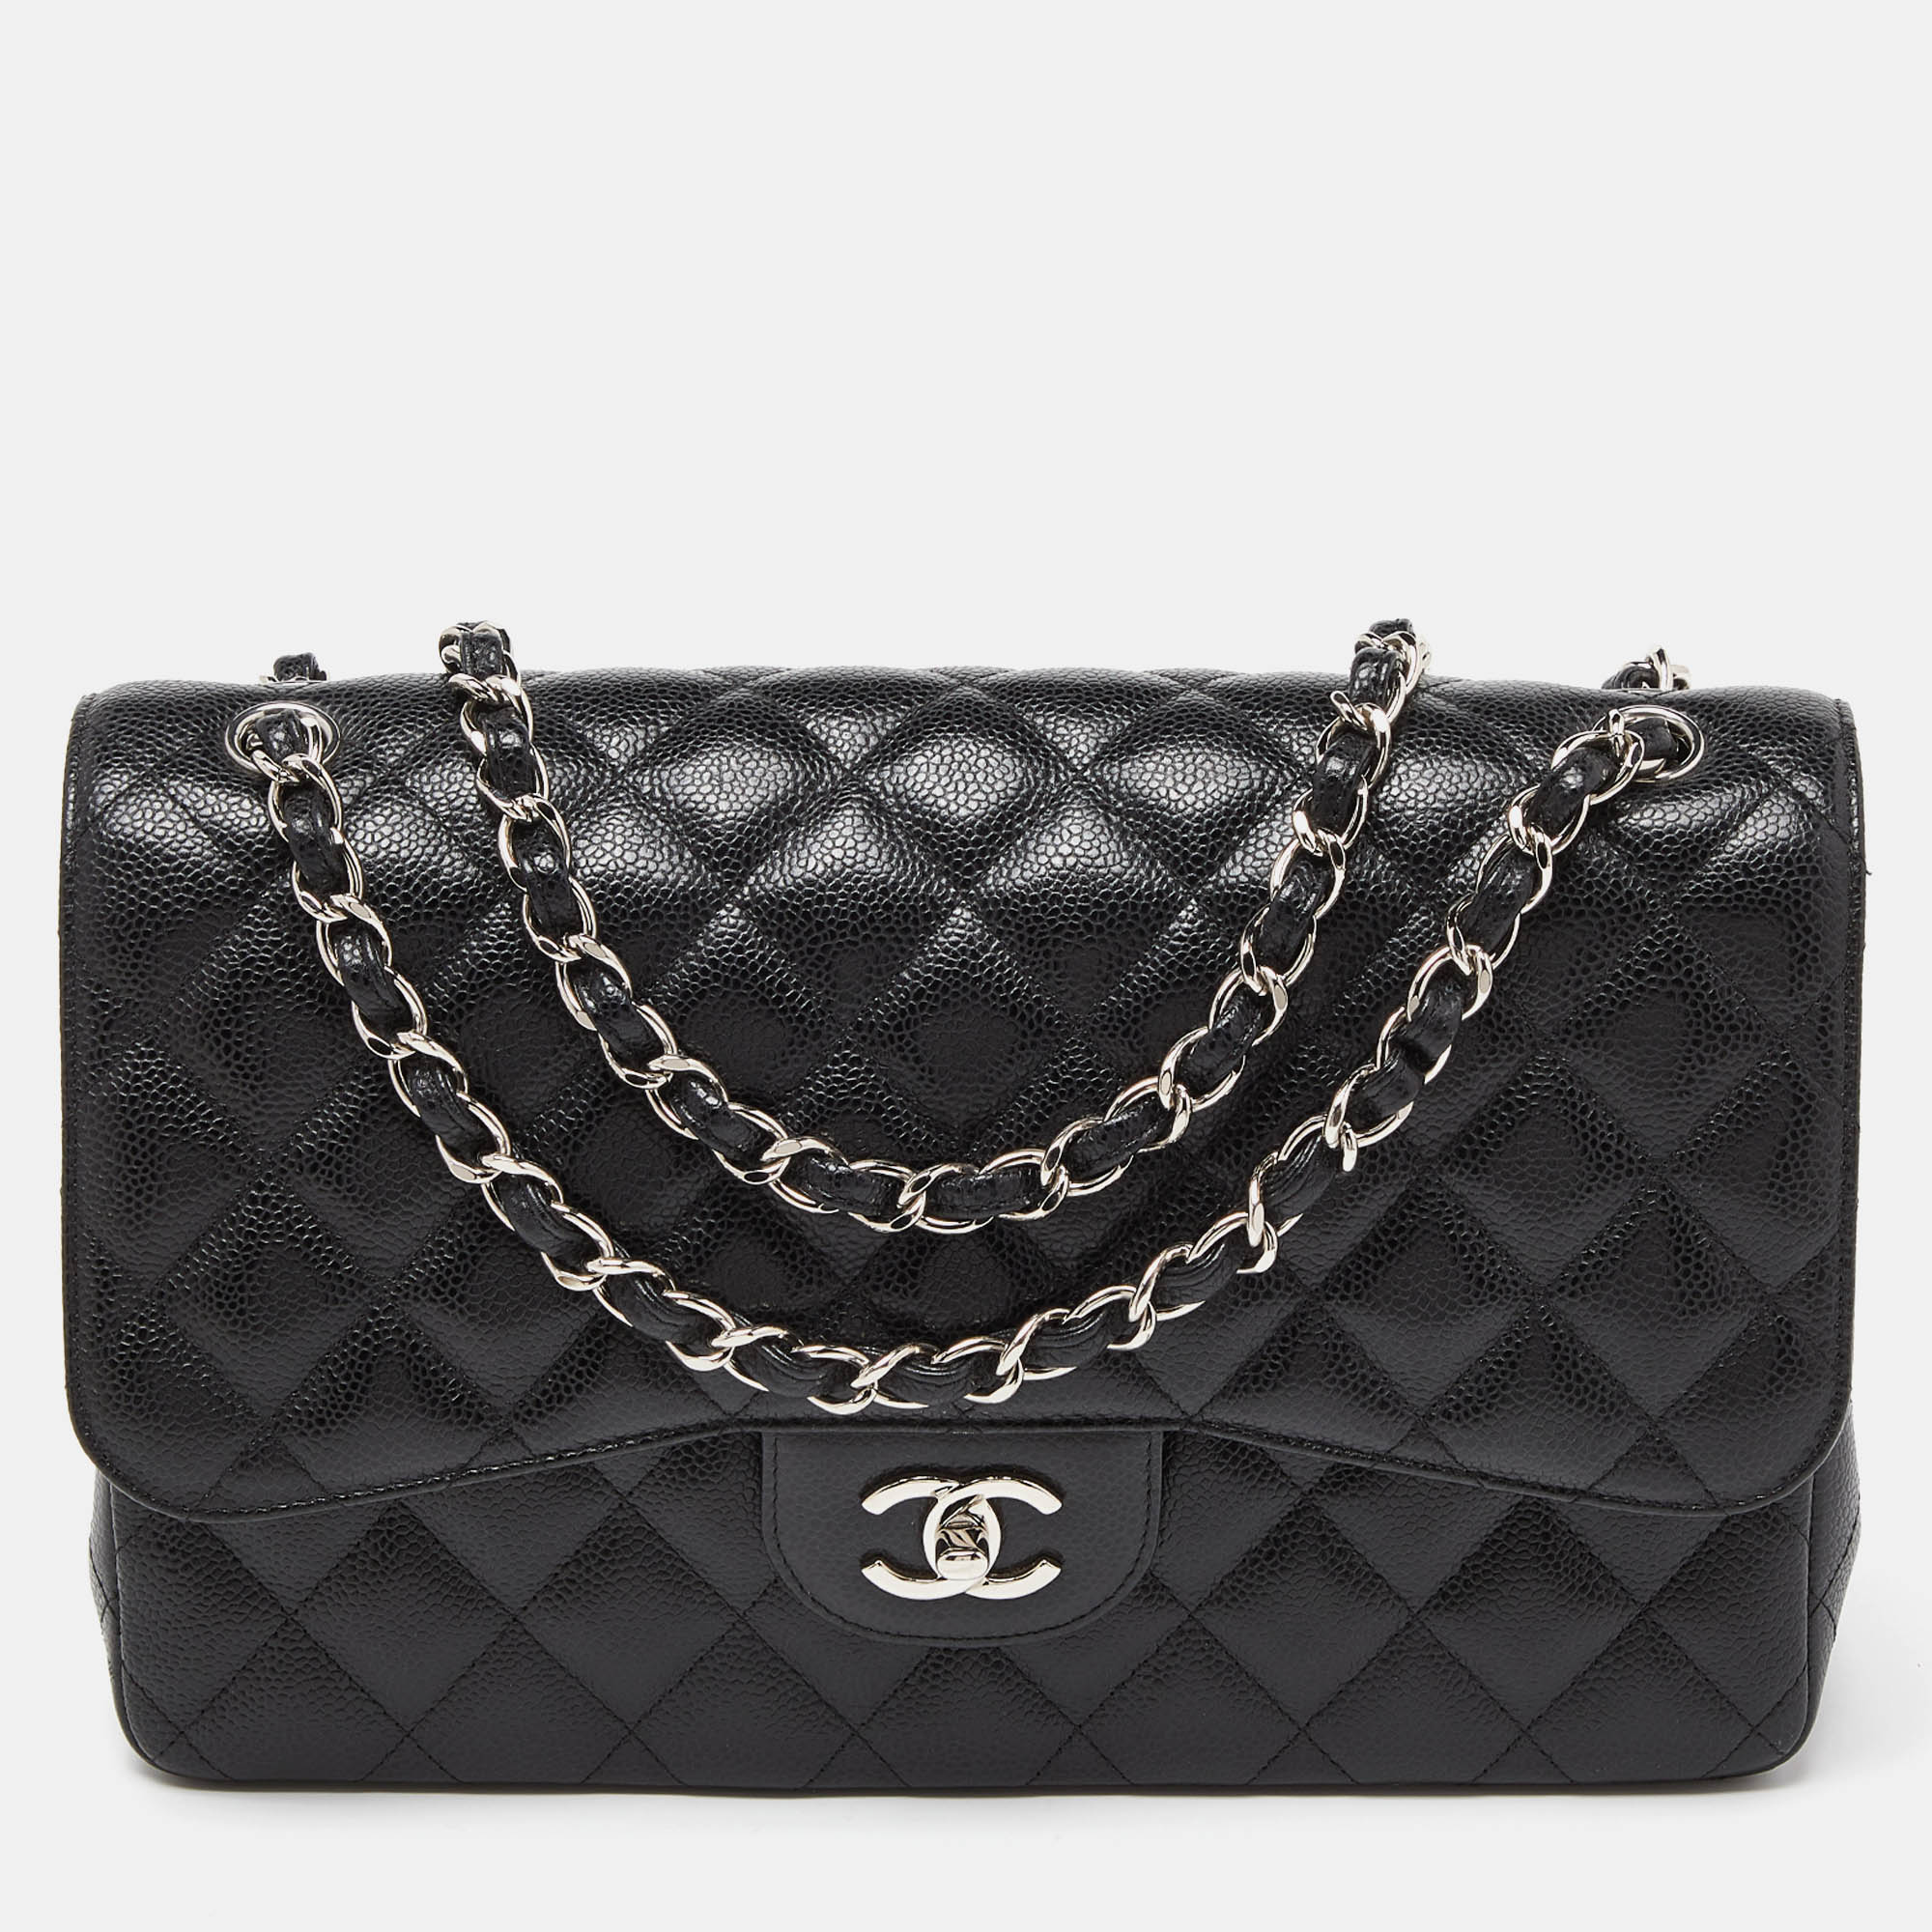 Chanel black caviar quilted leather jumbo classic double flap bag